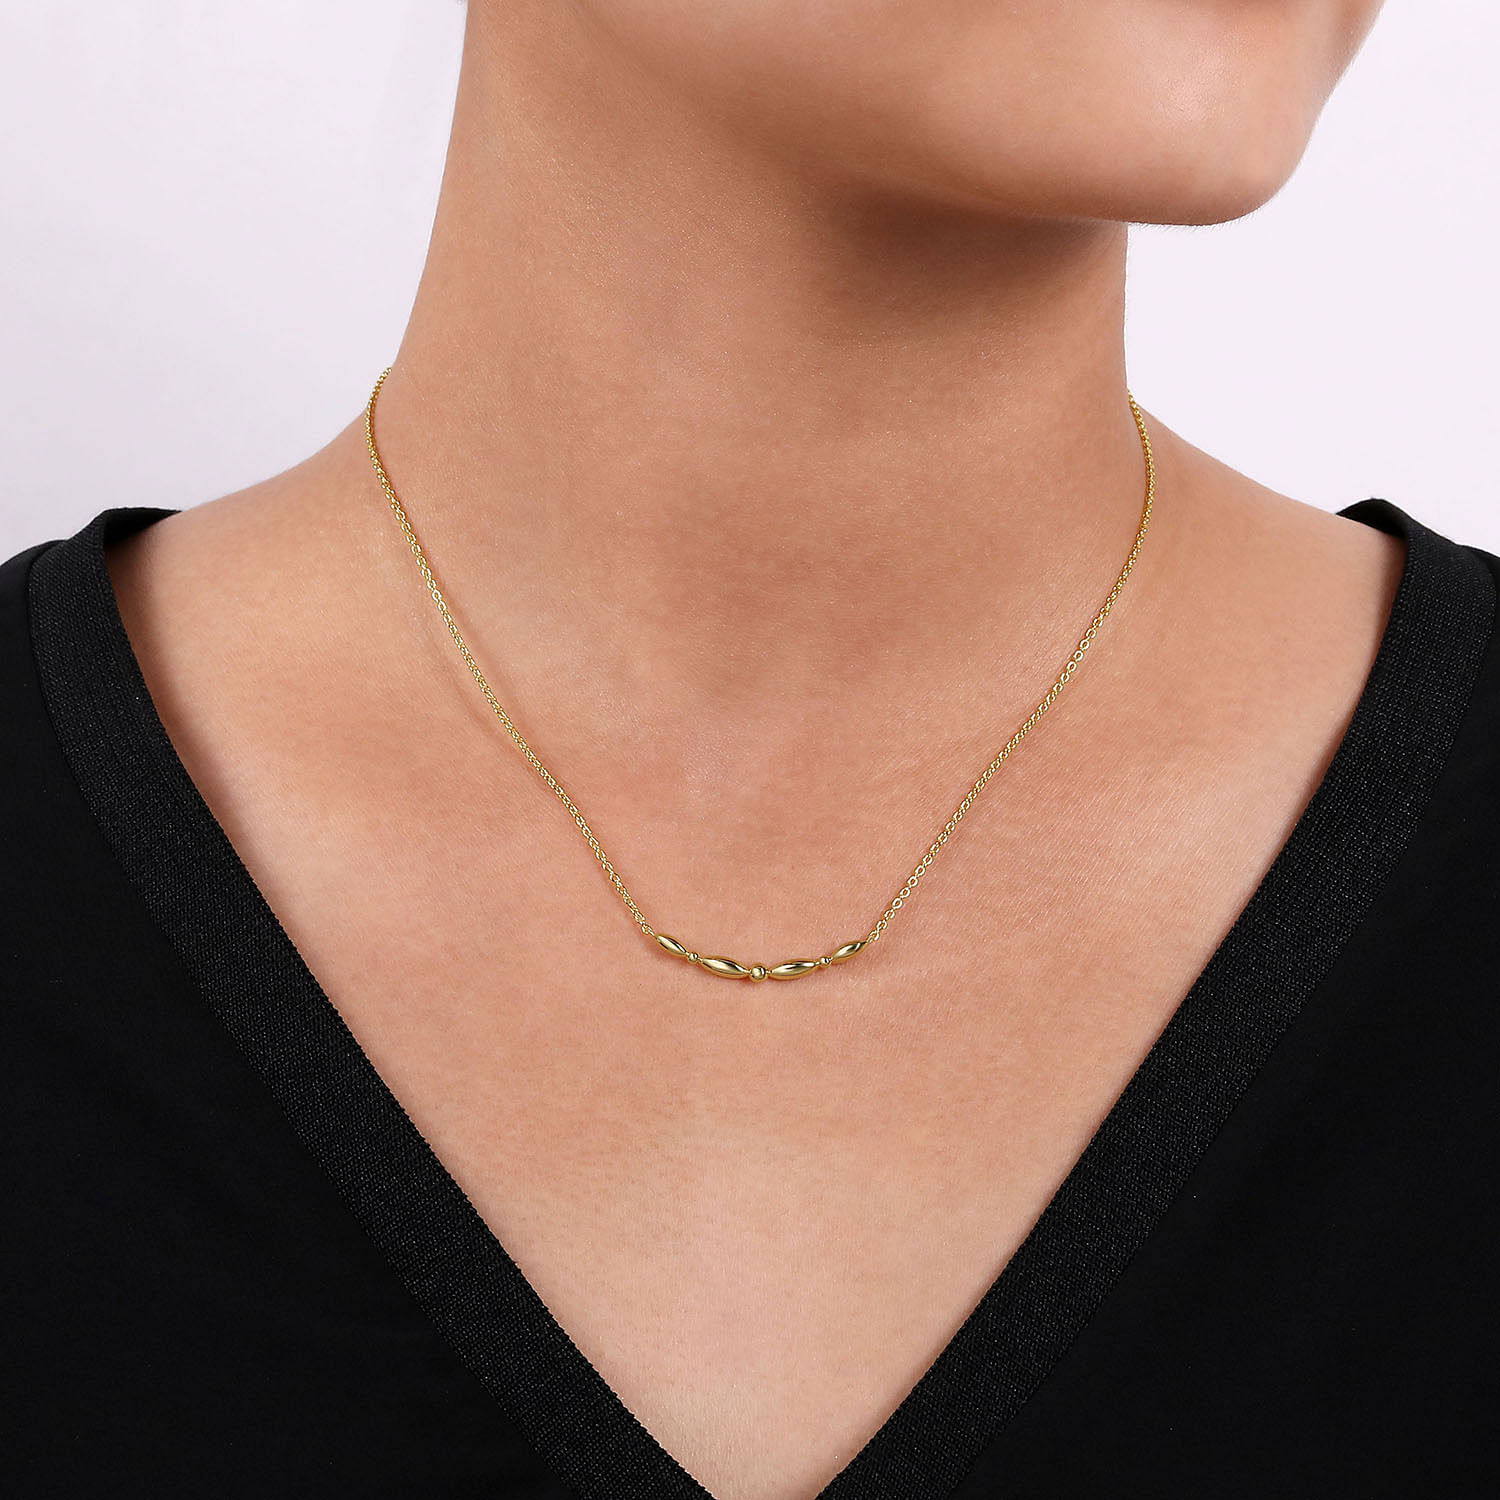 14K Yellow Gold Beaded Curved Bar Necklace